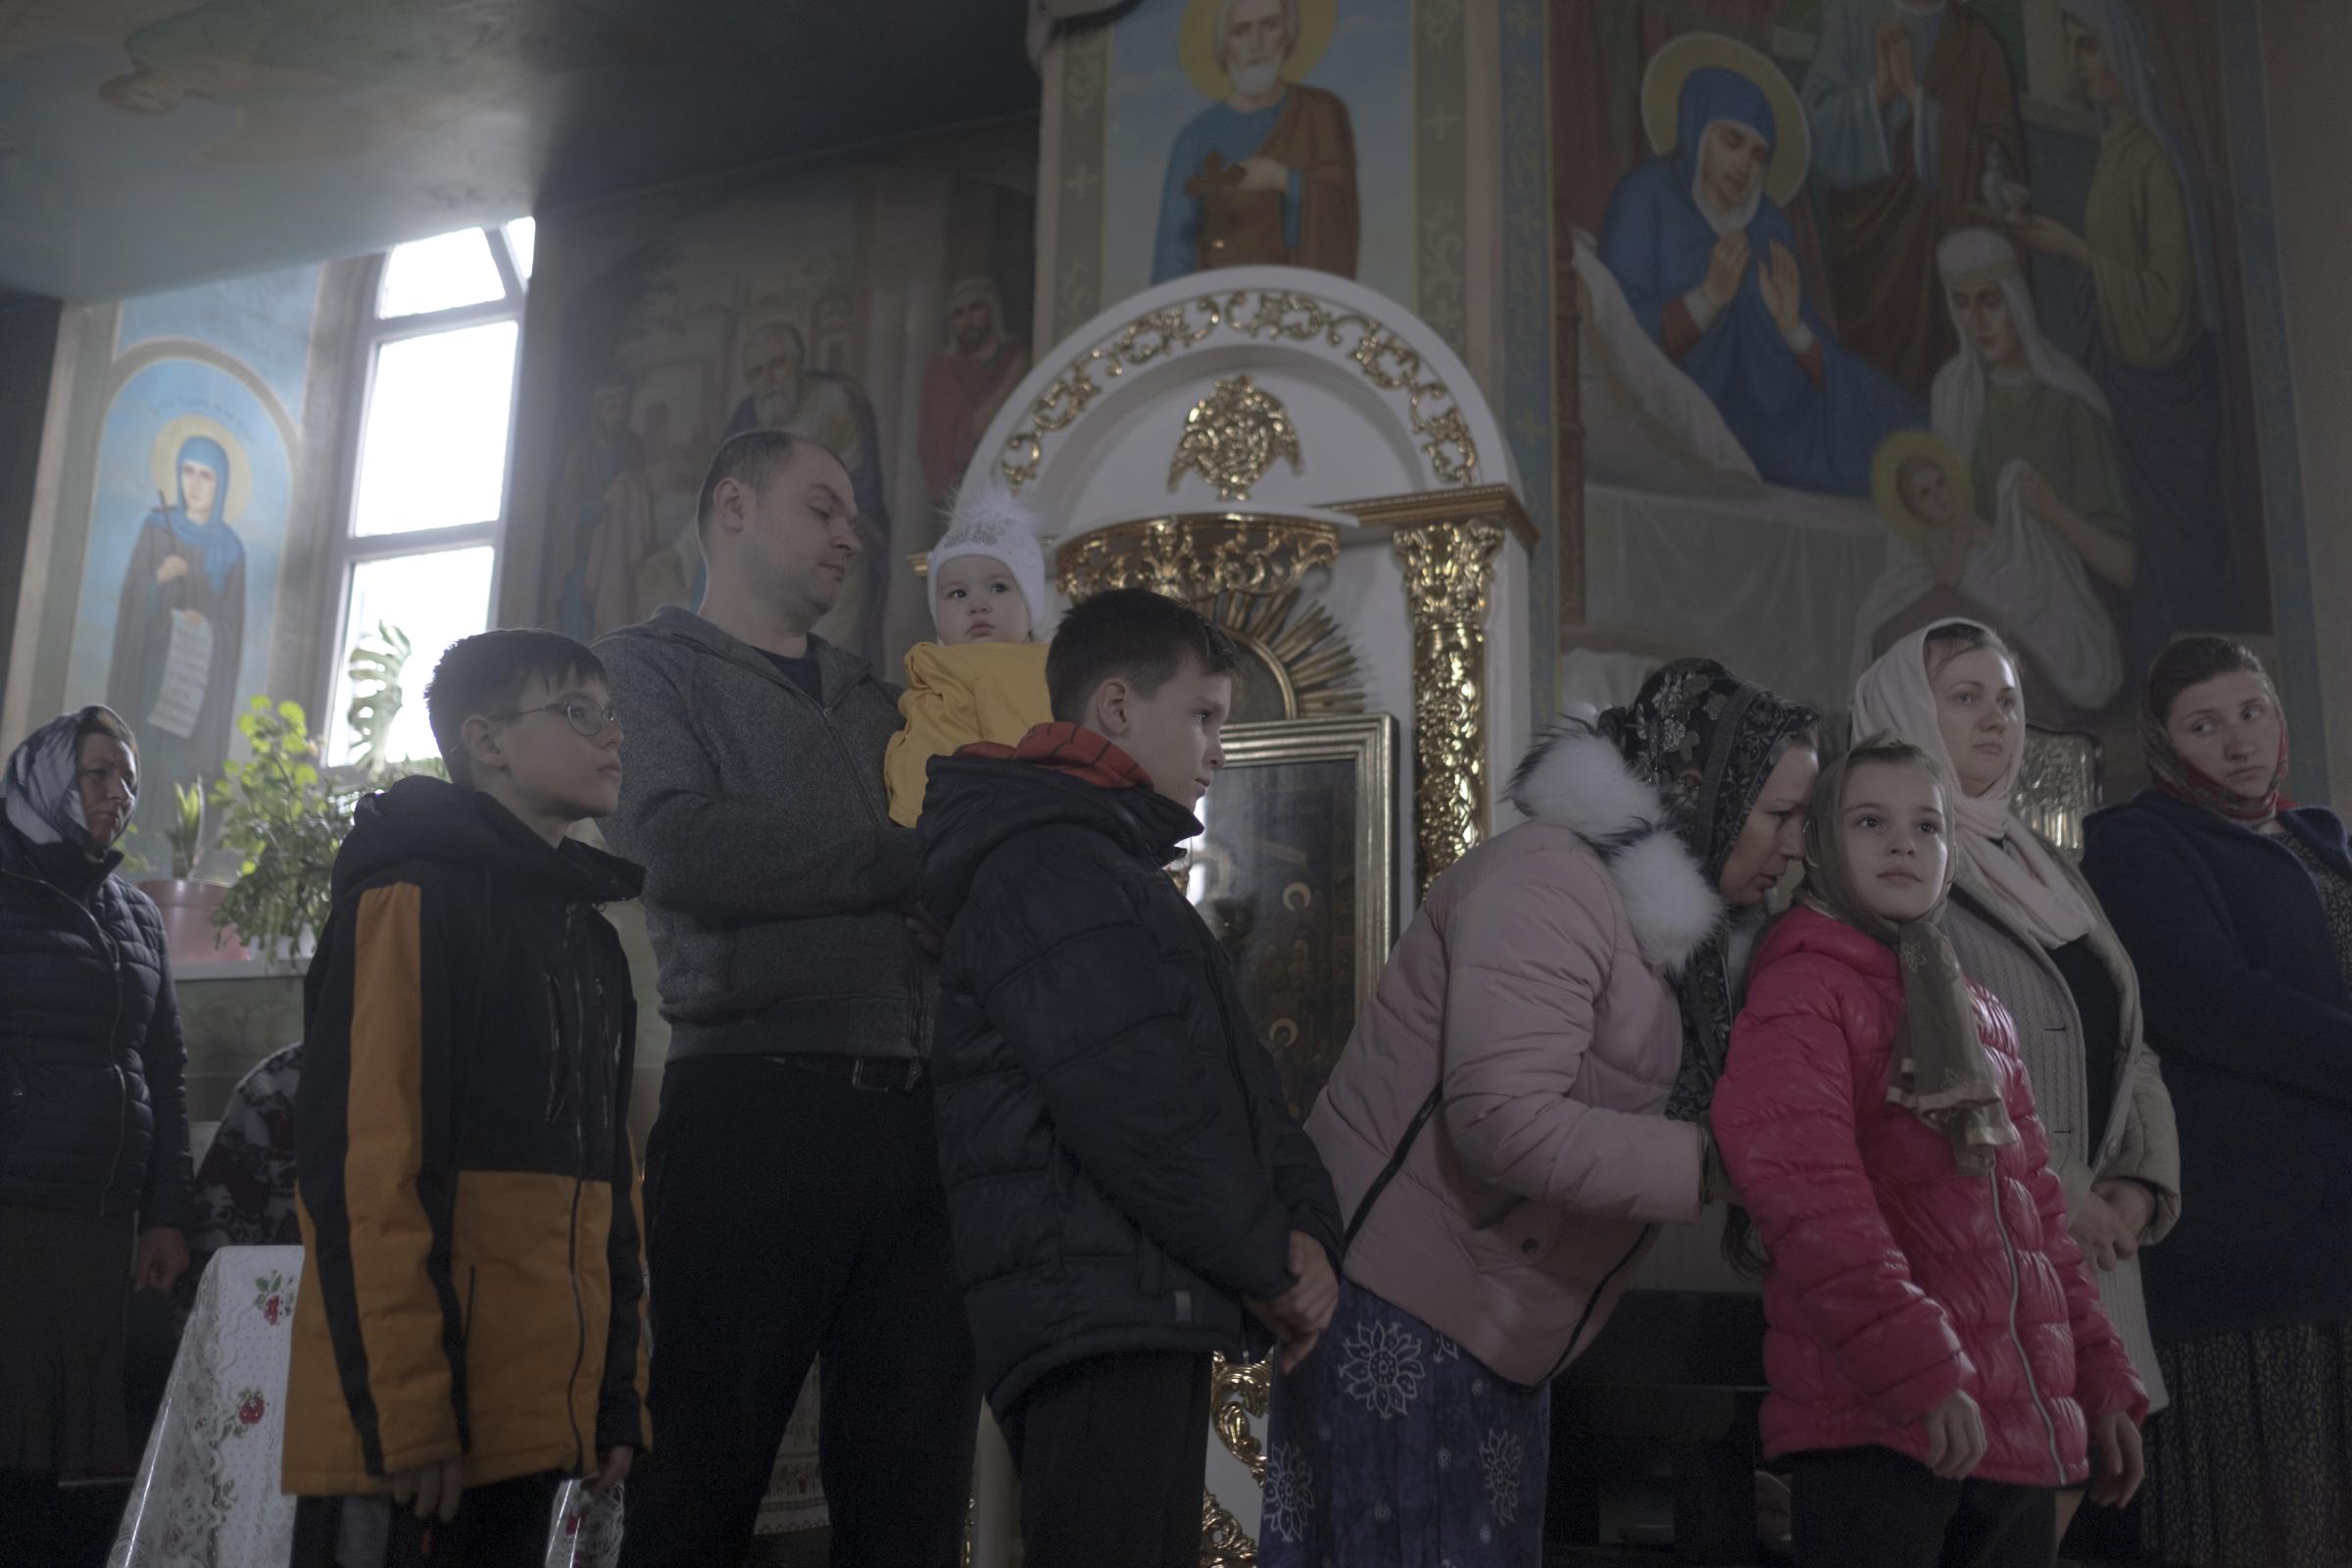 Moldovans who sheltered Ukrainian refugees at home - Lena, Georgiy and children are visiting local church.